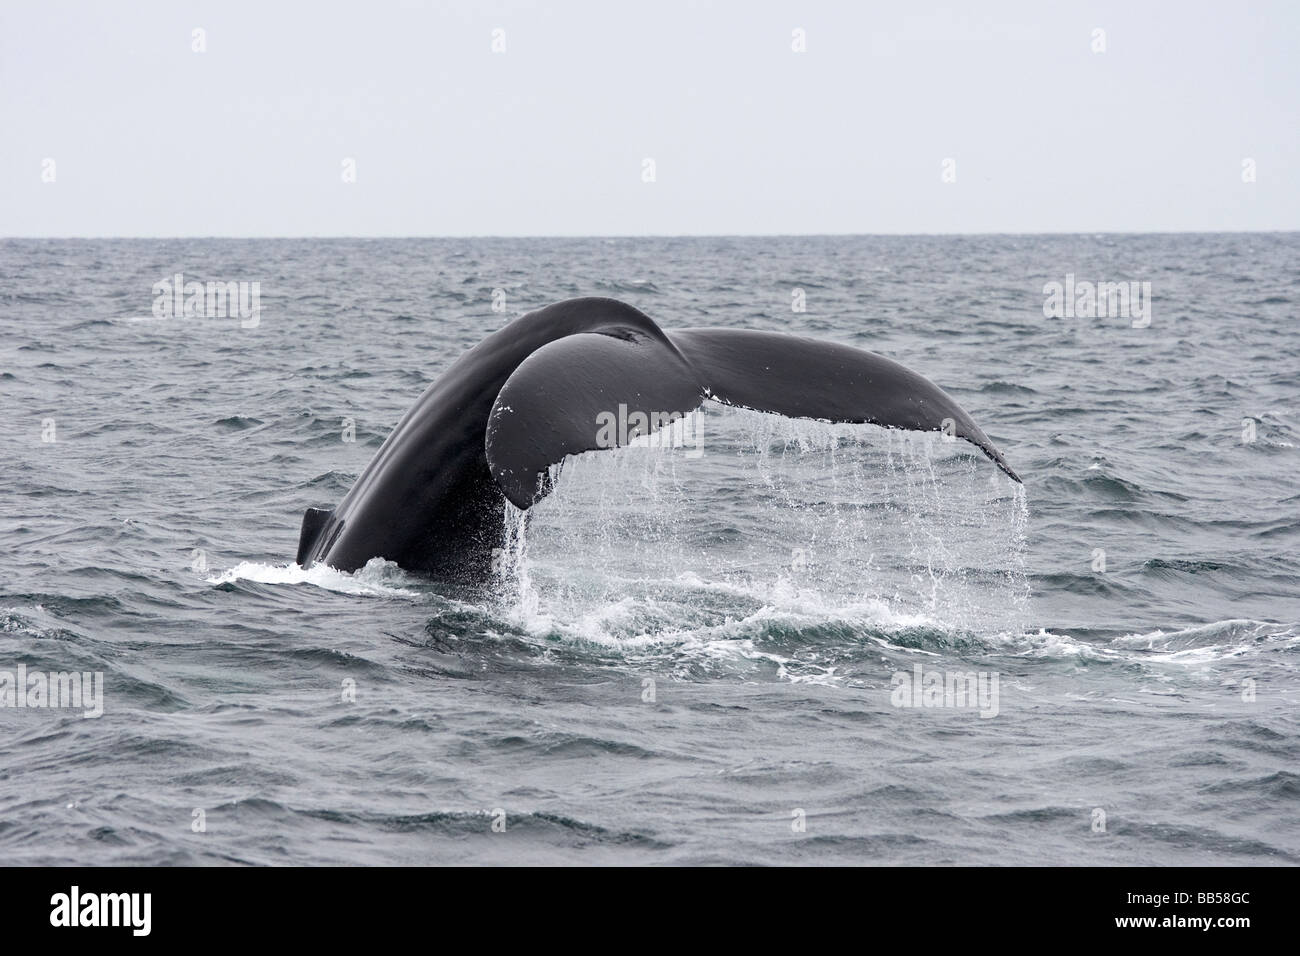 Whale tail, aka flukes, of a Humpback whale drip water as it leaves the surface in the North Atlantic near Stellwagen bank. Stock Photo